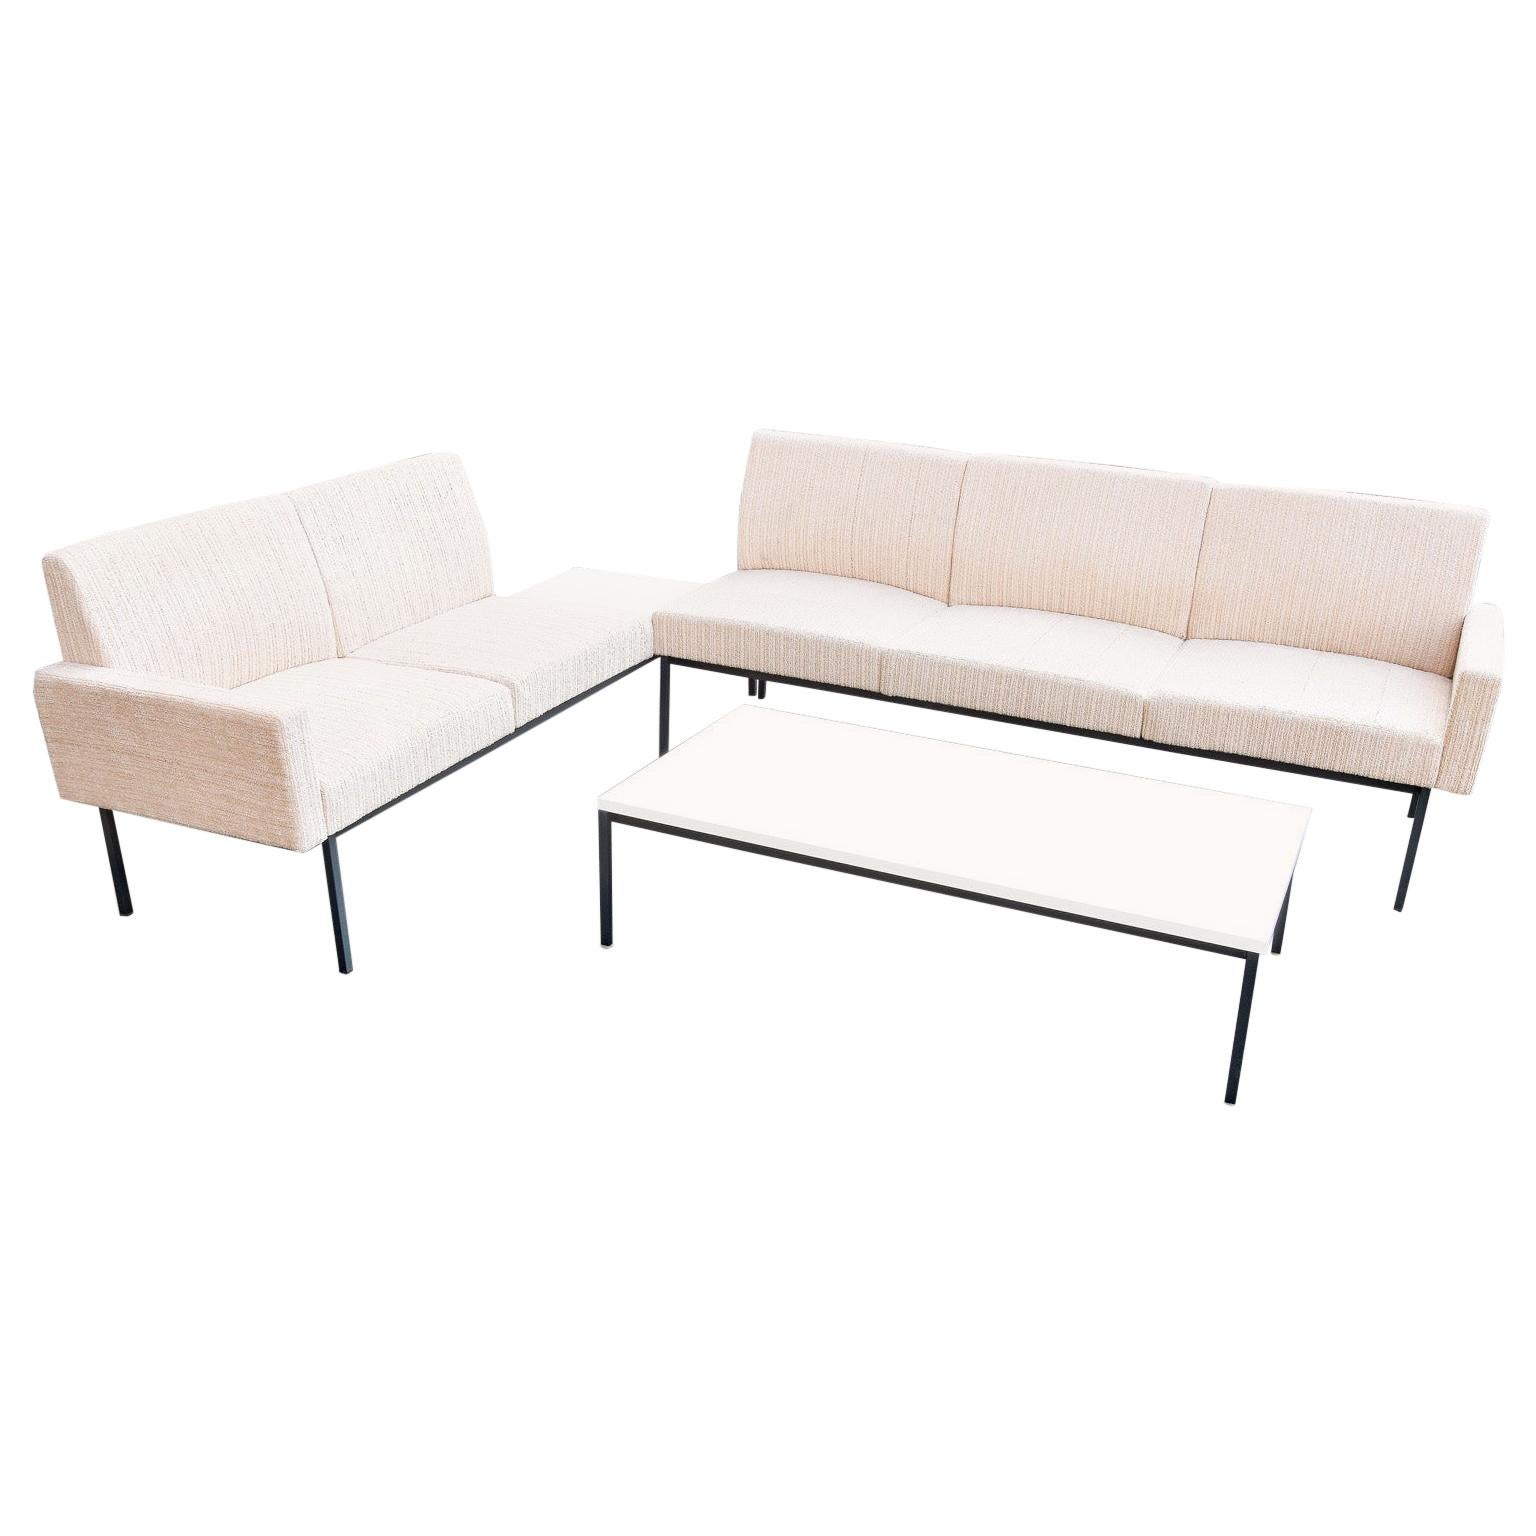 Modular Seating Group from Thonet, 1960s, Seating Elements, Lobby Sofa Beige For Sale